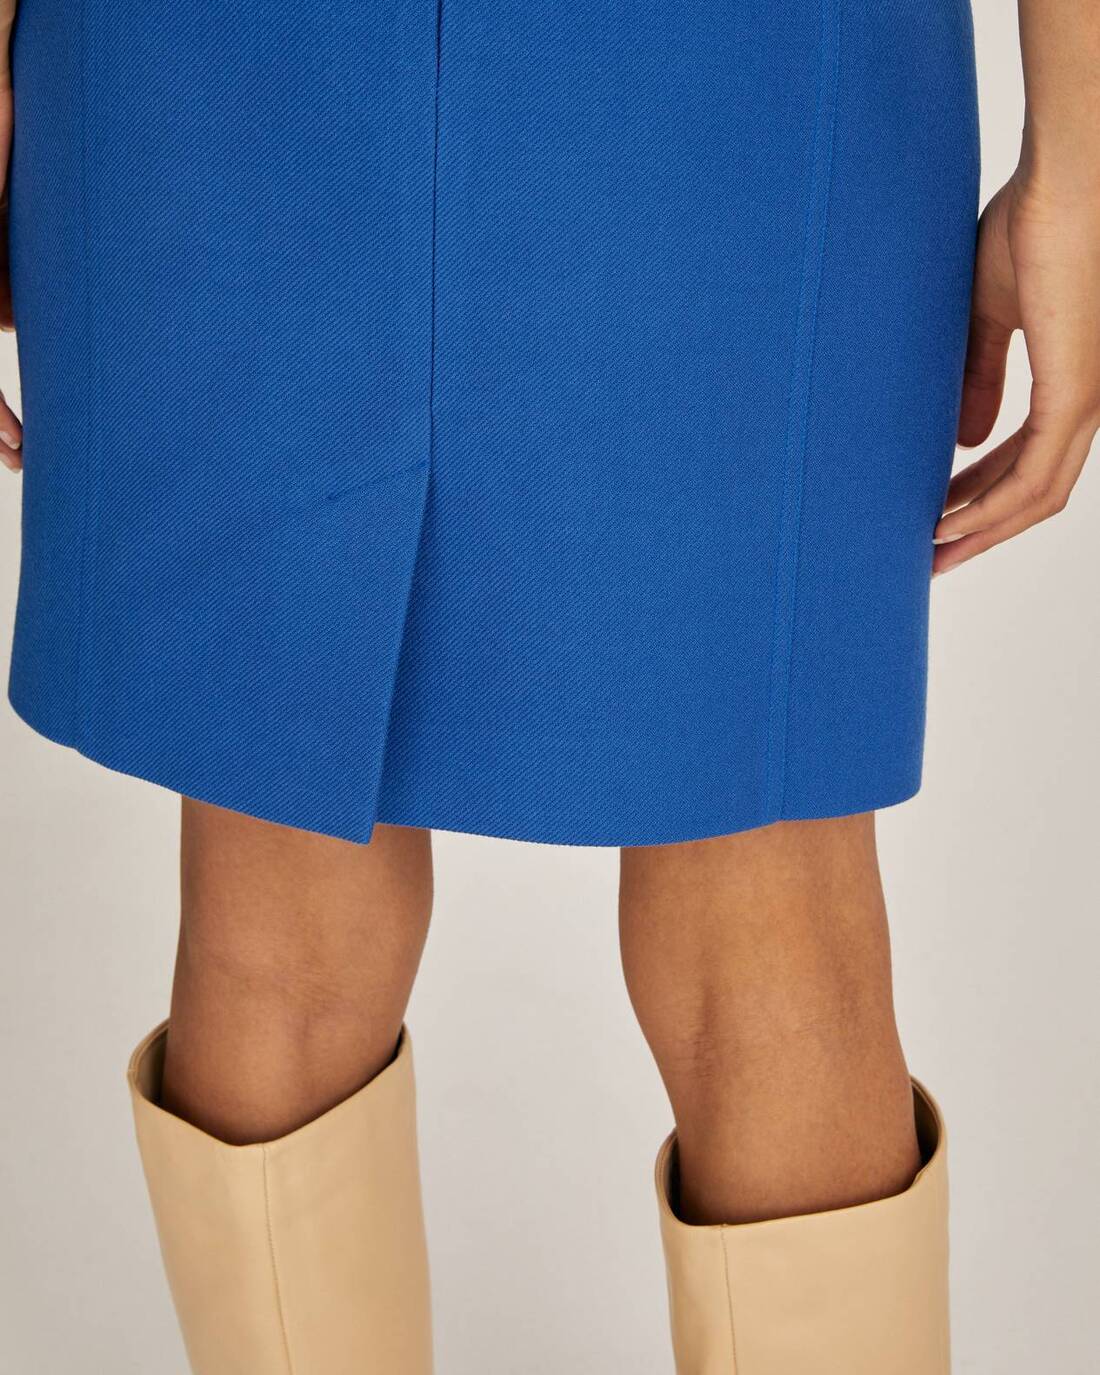 High rise skirt with darts 